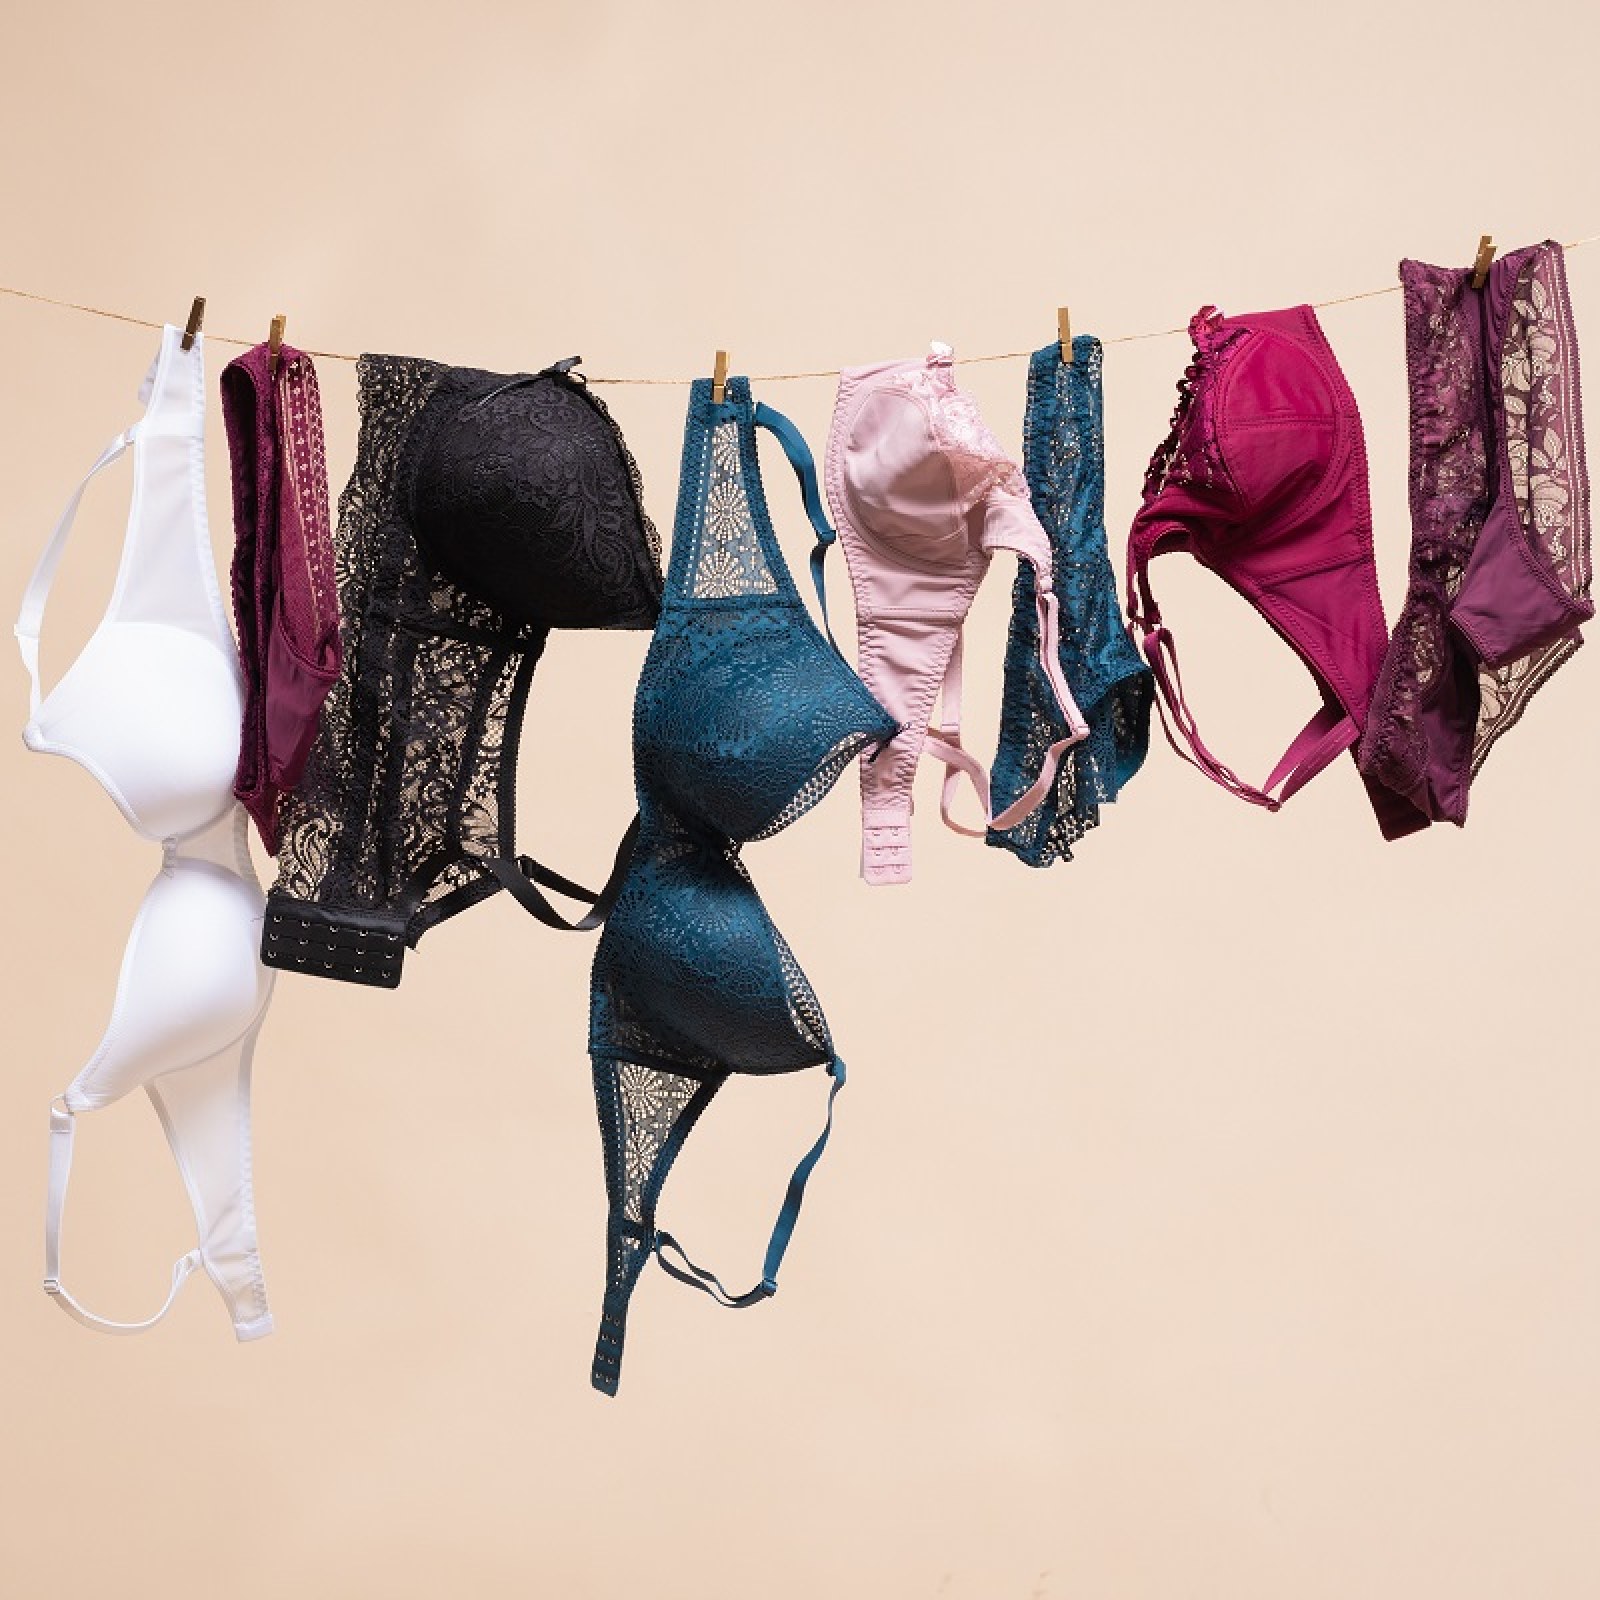 What really happens when you sleep in lingerie revealed